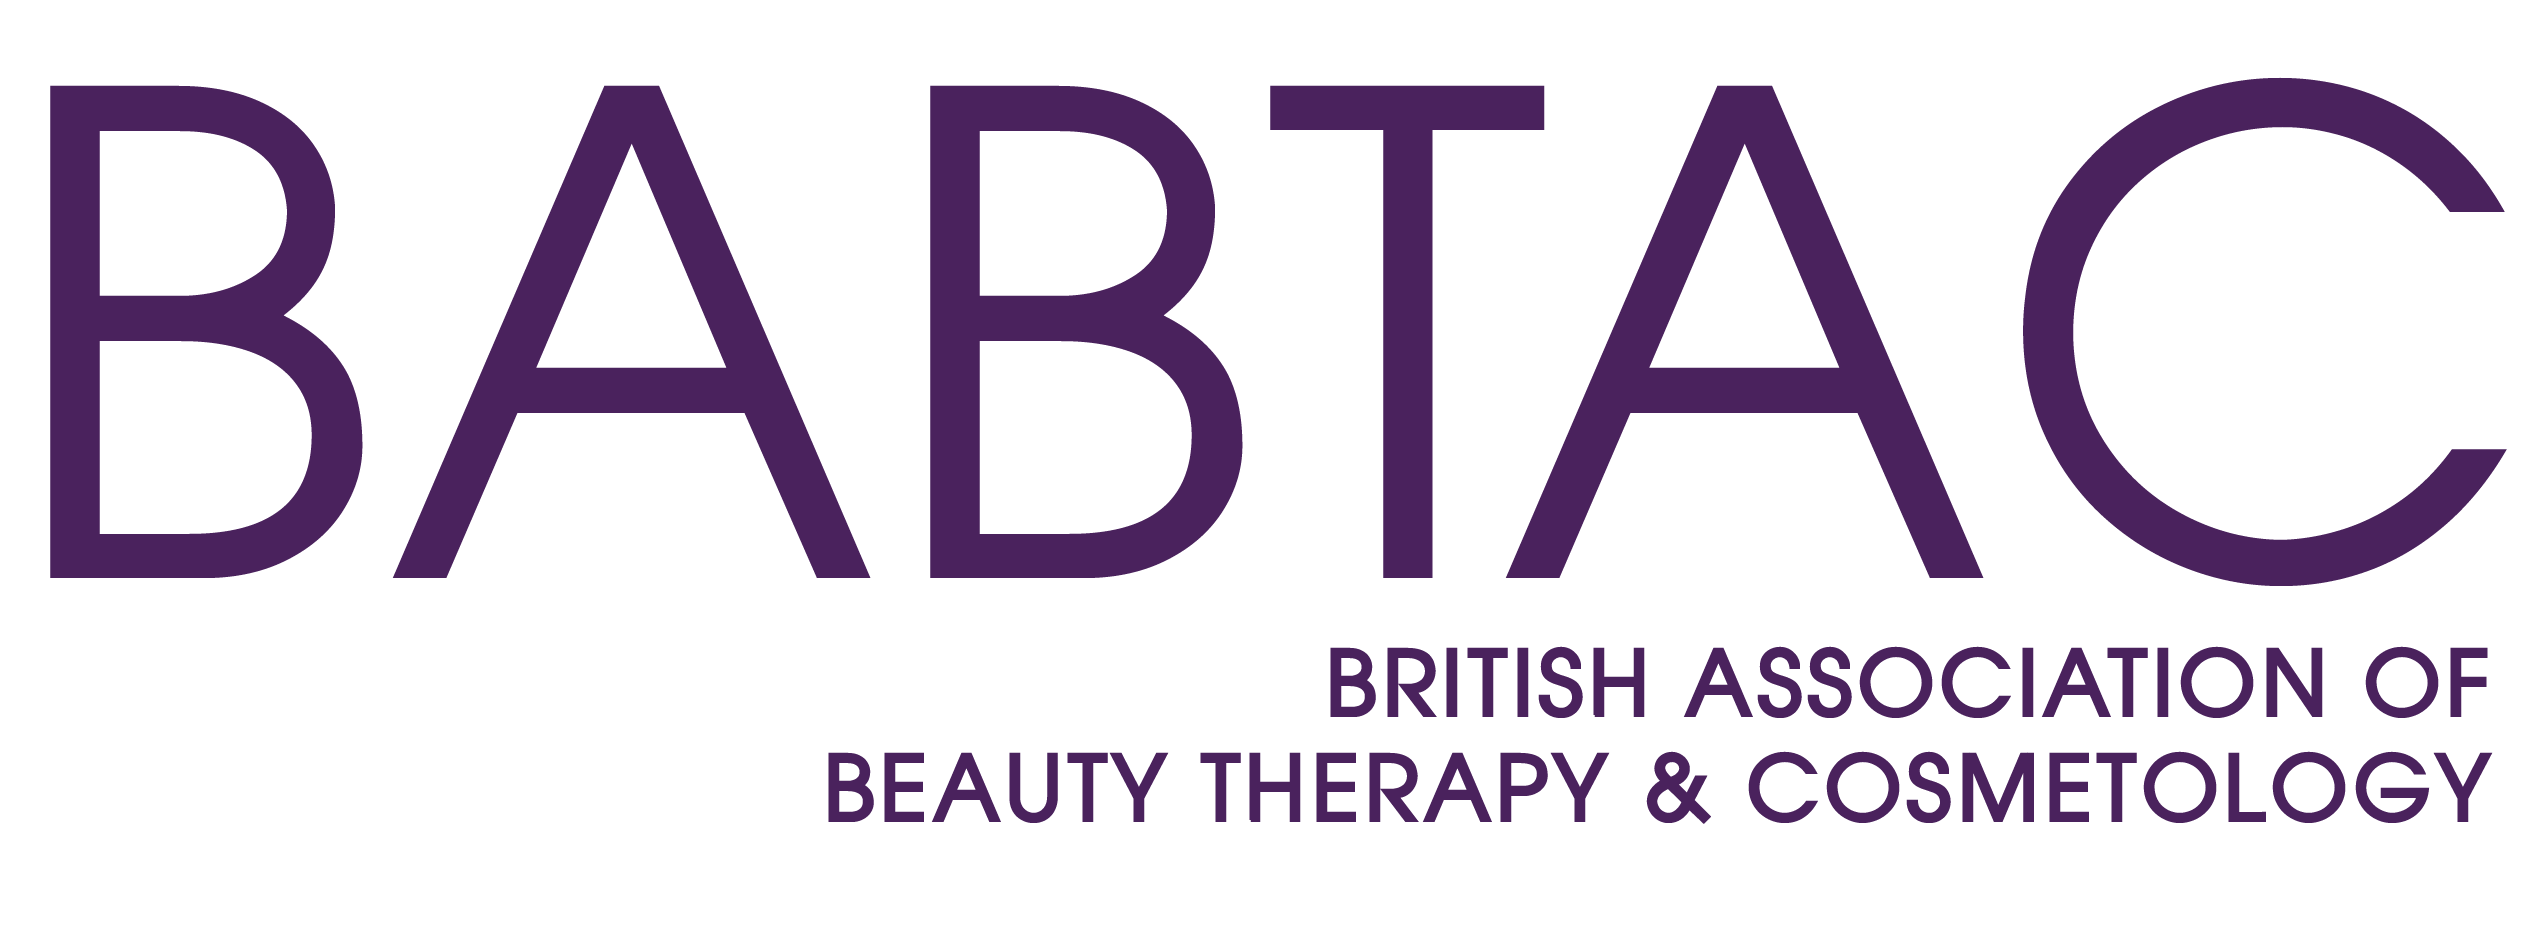 BABTAC British Association of Beauty Therapy & Cosmetology